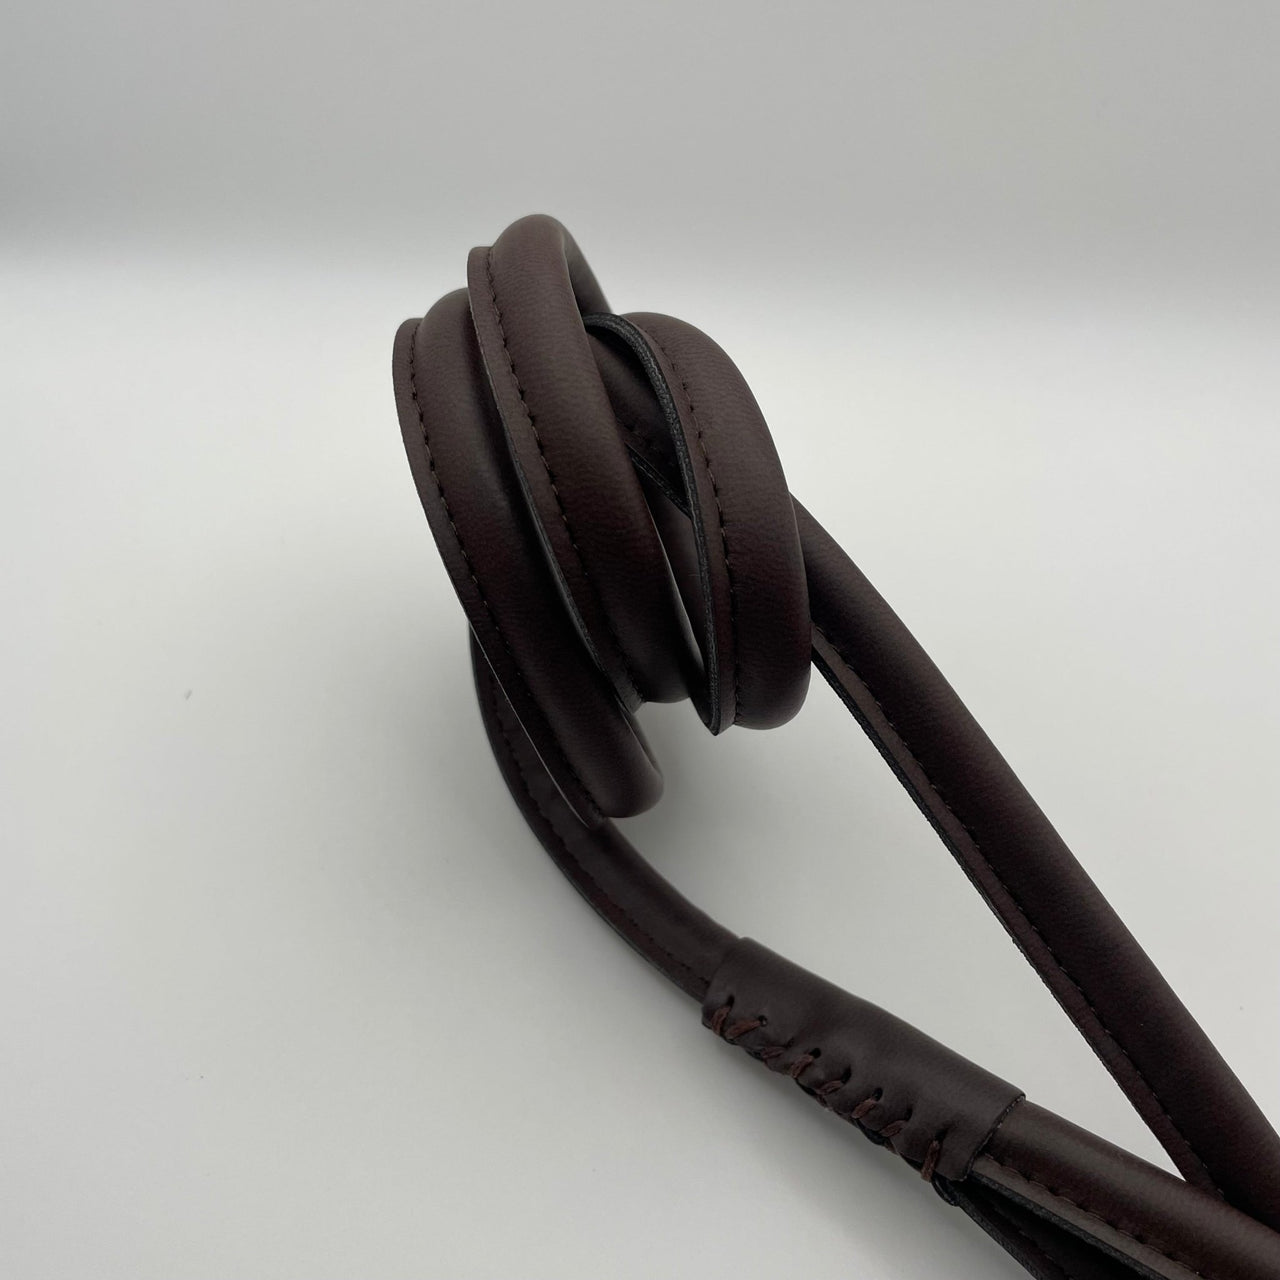 Project Blu Chestnut Apple Brown Rolled Leather Dog Leash 110cm - liquidation.store